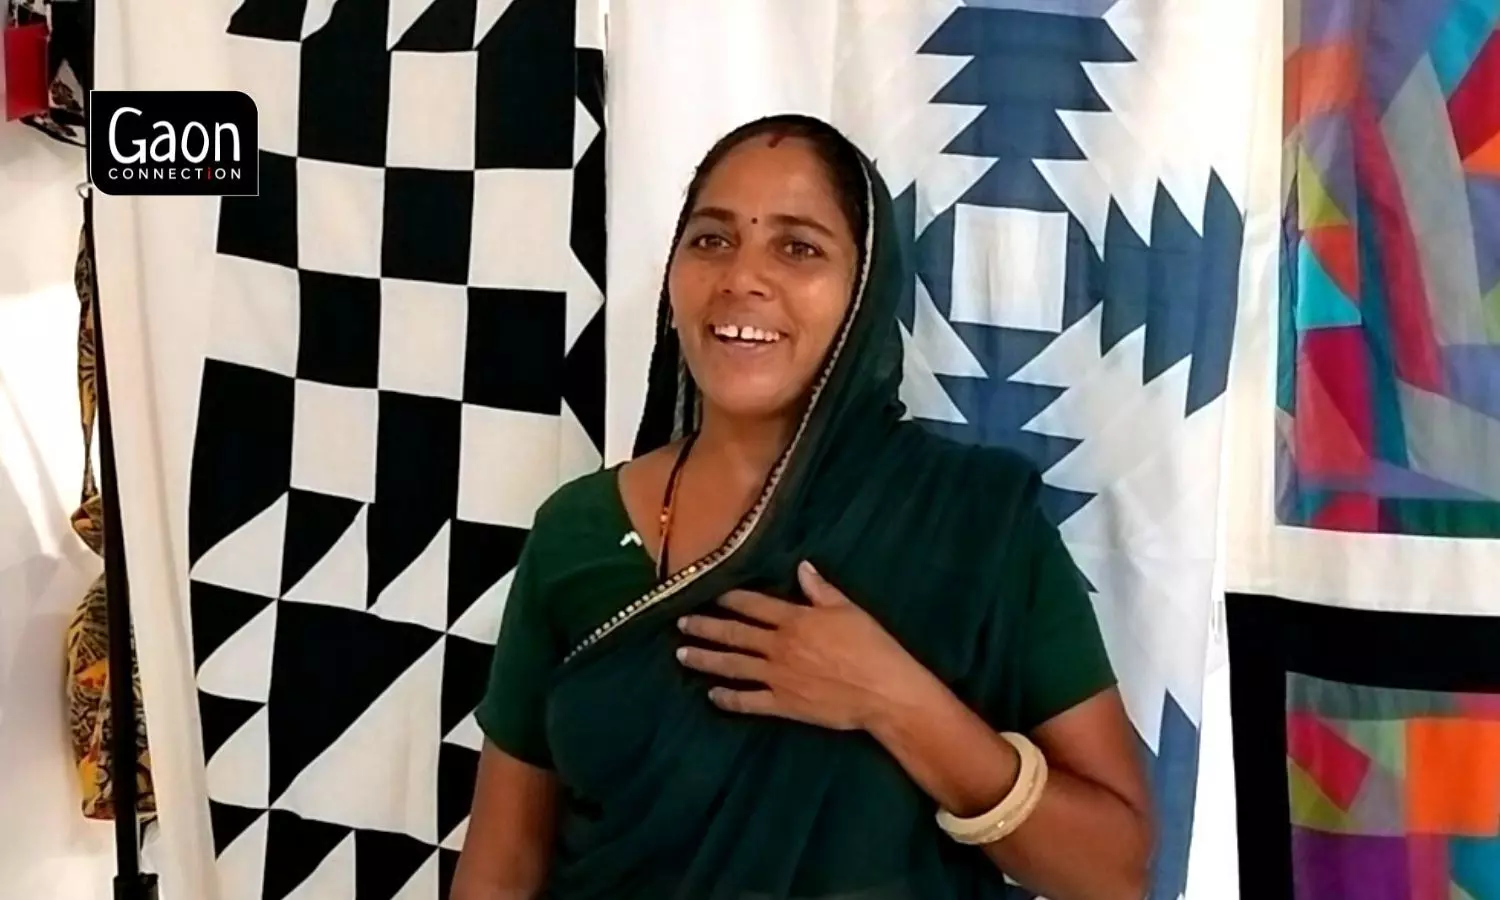 Married at 8 and unlettered herself, 49-year-old Saguni Devi from Ajmer champions girls education